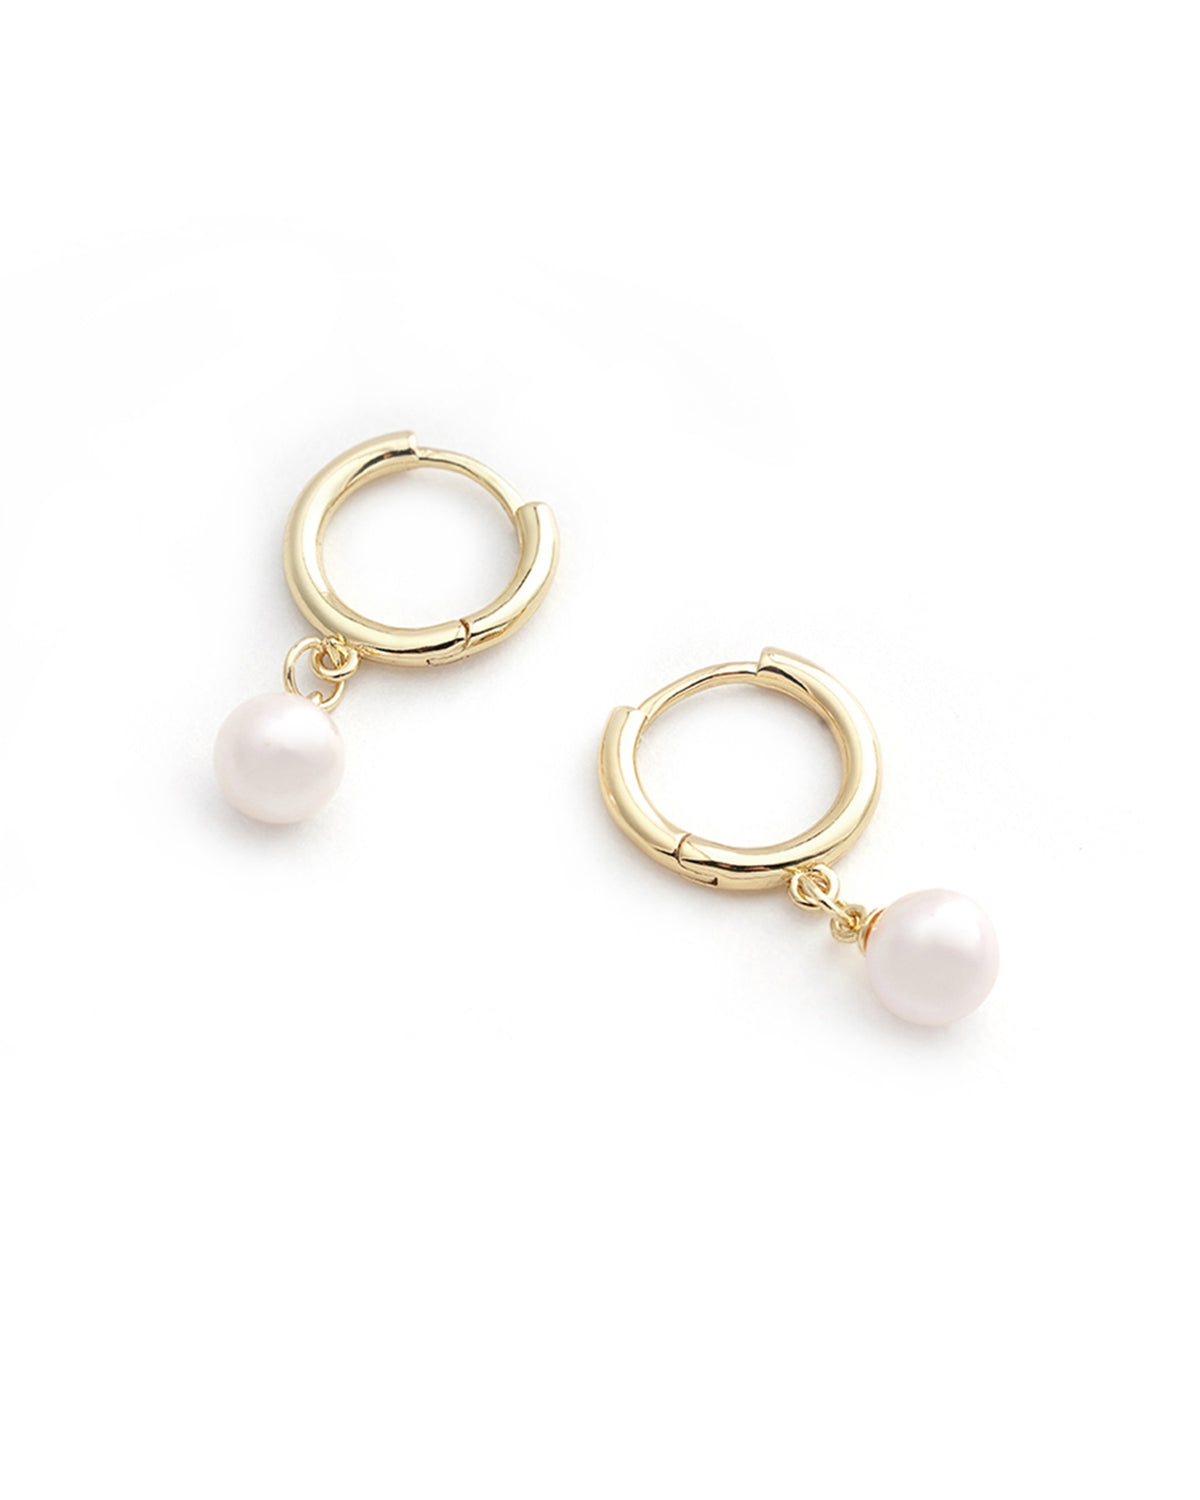 14k Gold 7-8mm Natural High-Quality Huggie Earrings with Pearl